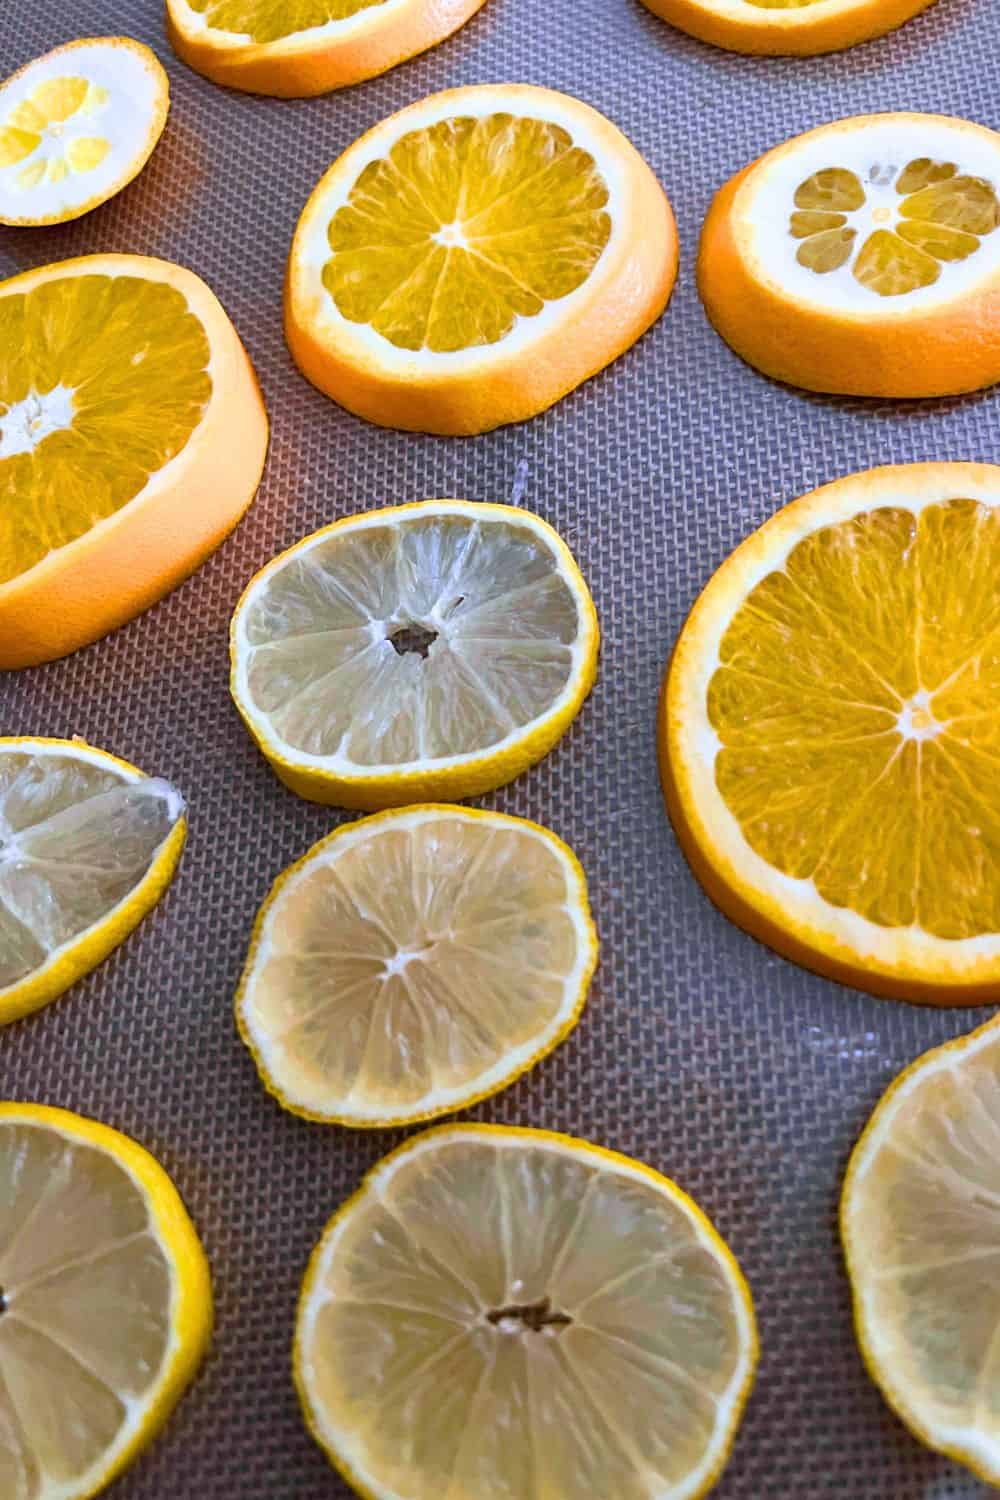 How To Make Citrus Ornaments Drying Oranges For Holiday Decor - fresh orange slices on a non stick mat on a cooking sheet for drying oranges in the oven